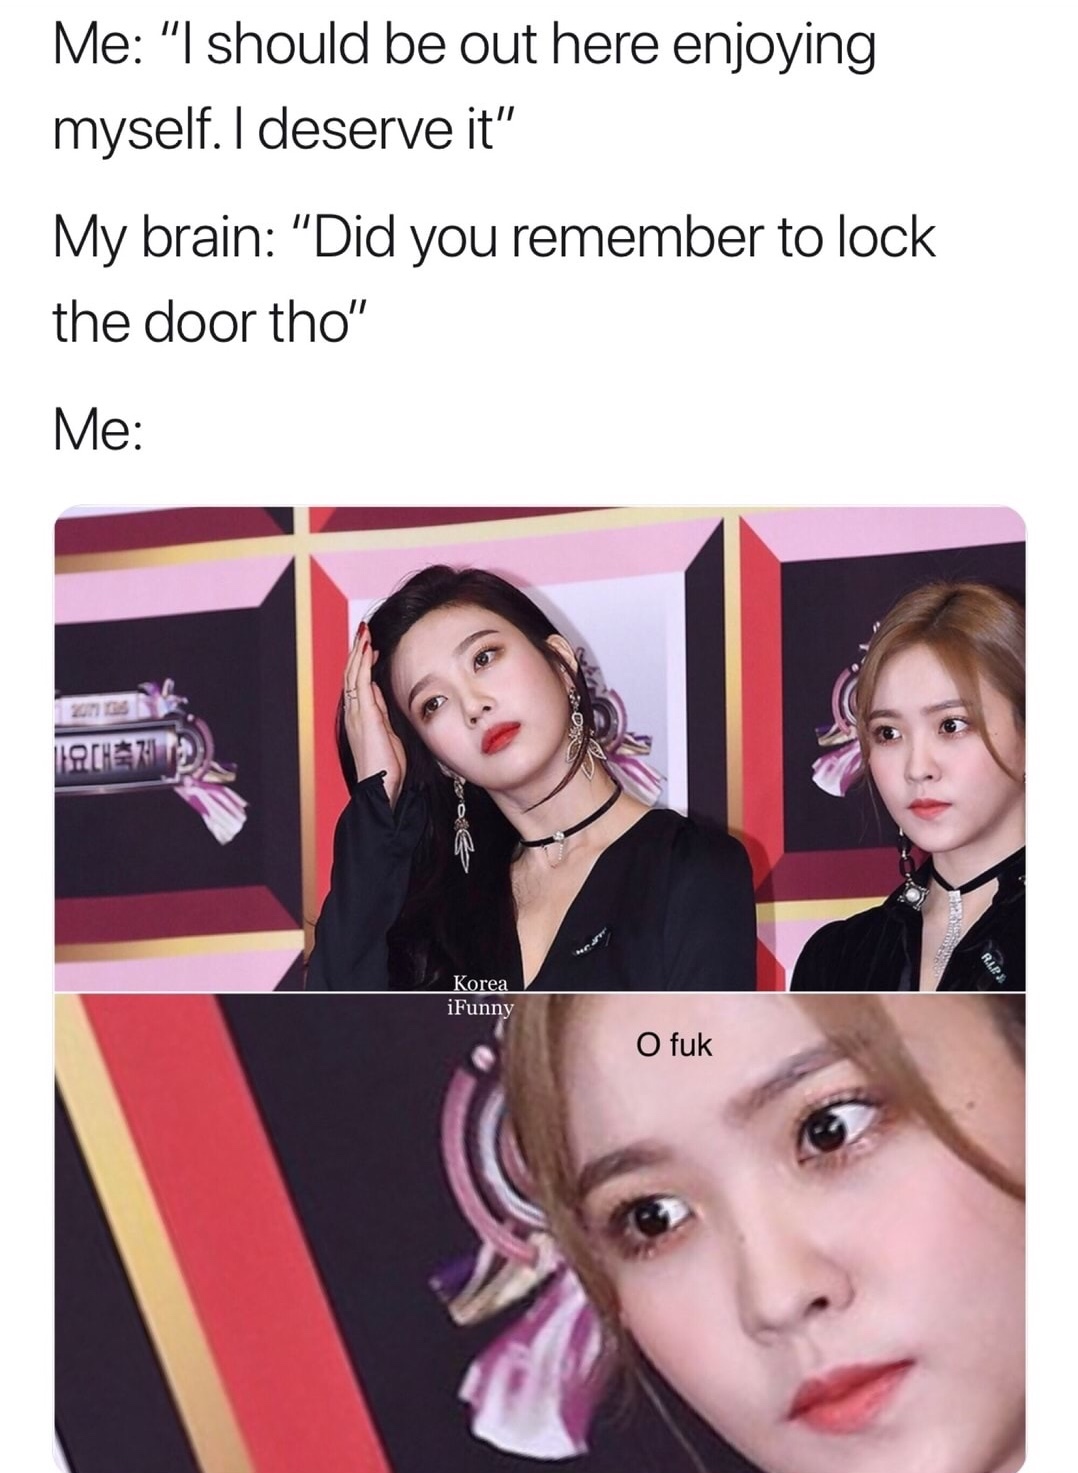 laugh dank memes funny memes - Me "I should be out here enjoying myself. I deserve it" My brain "Did you remember to lock the door tho" Me | . S Korea iFunny O fuk